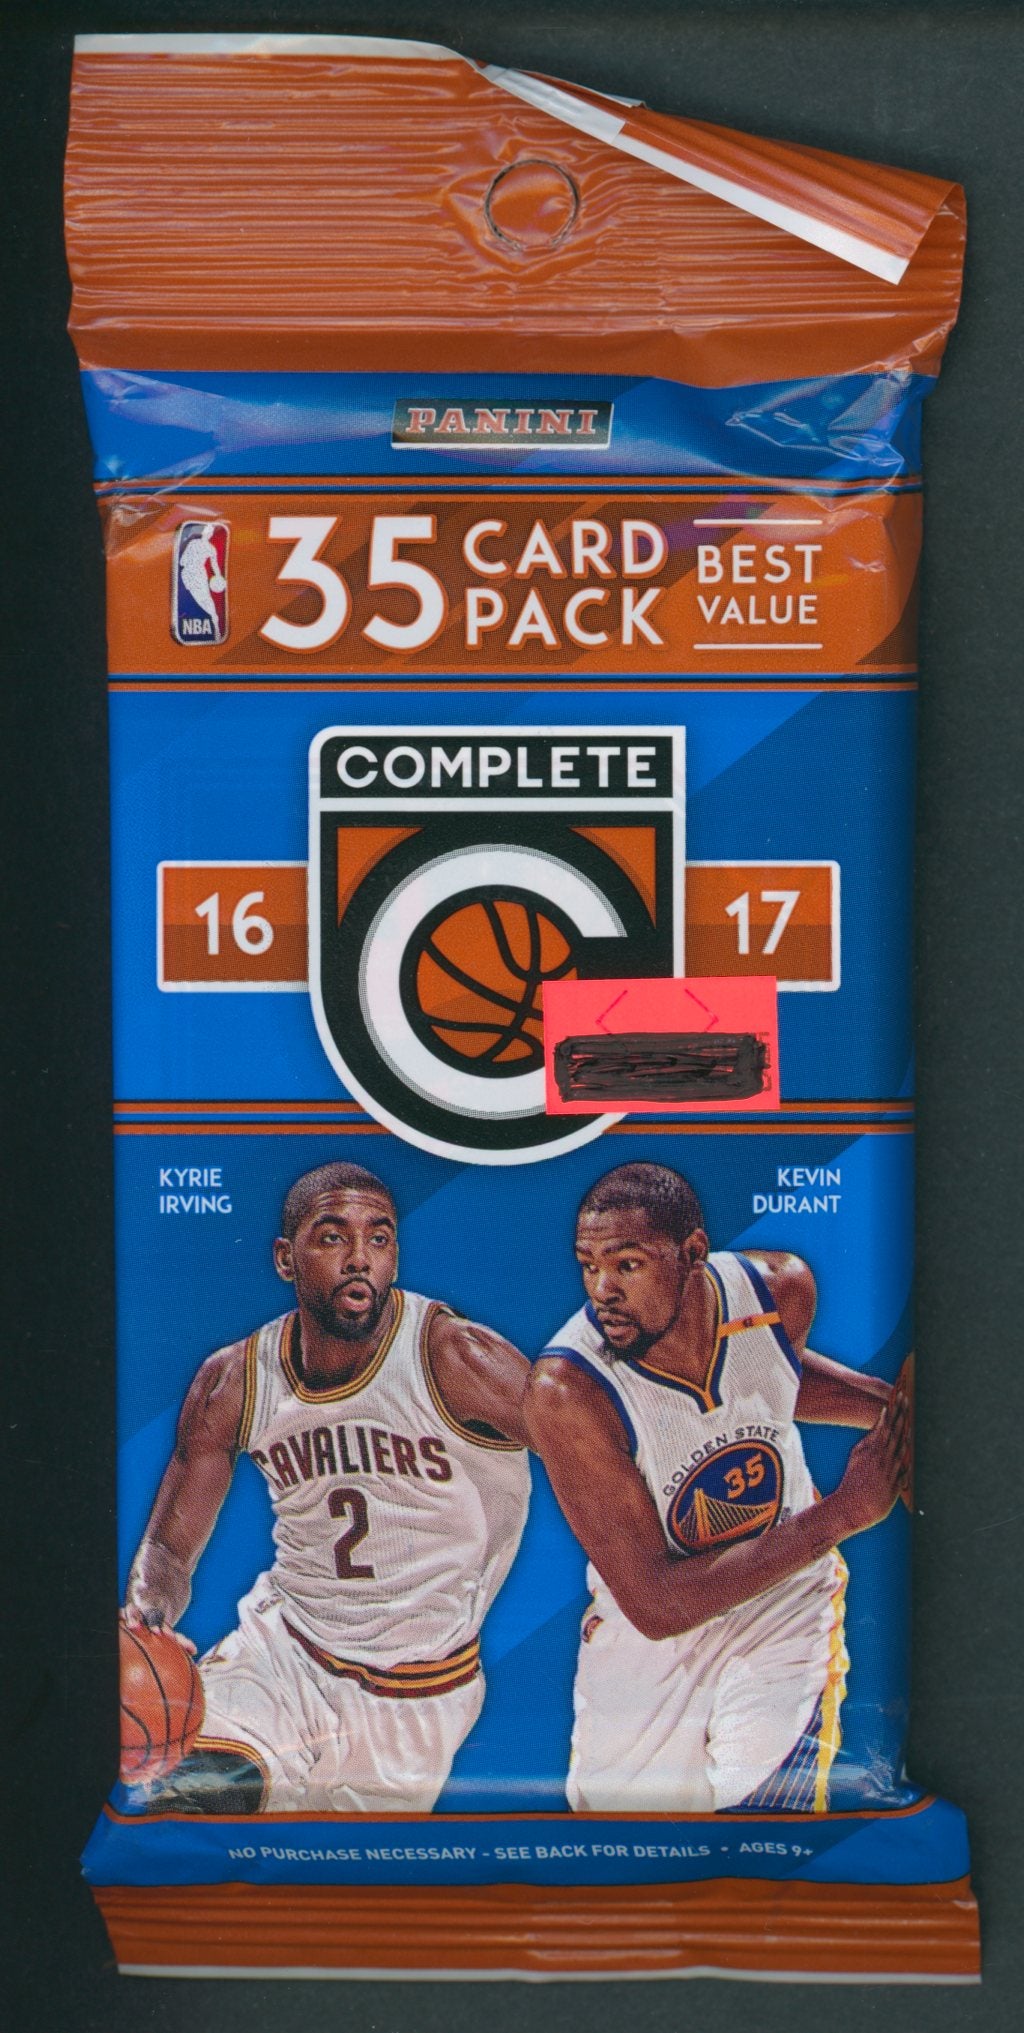 2016/17 Panini Complete Basketball Unopened Cello Fat Pack (35)